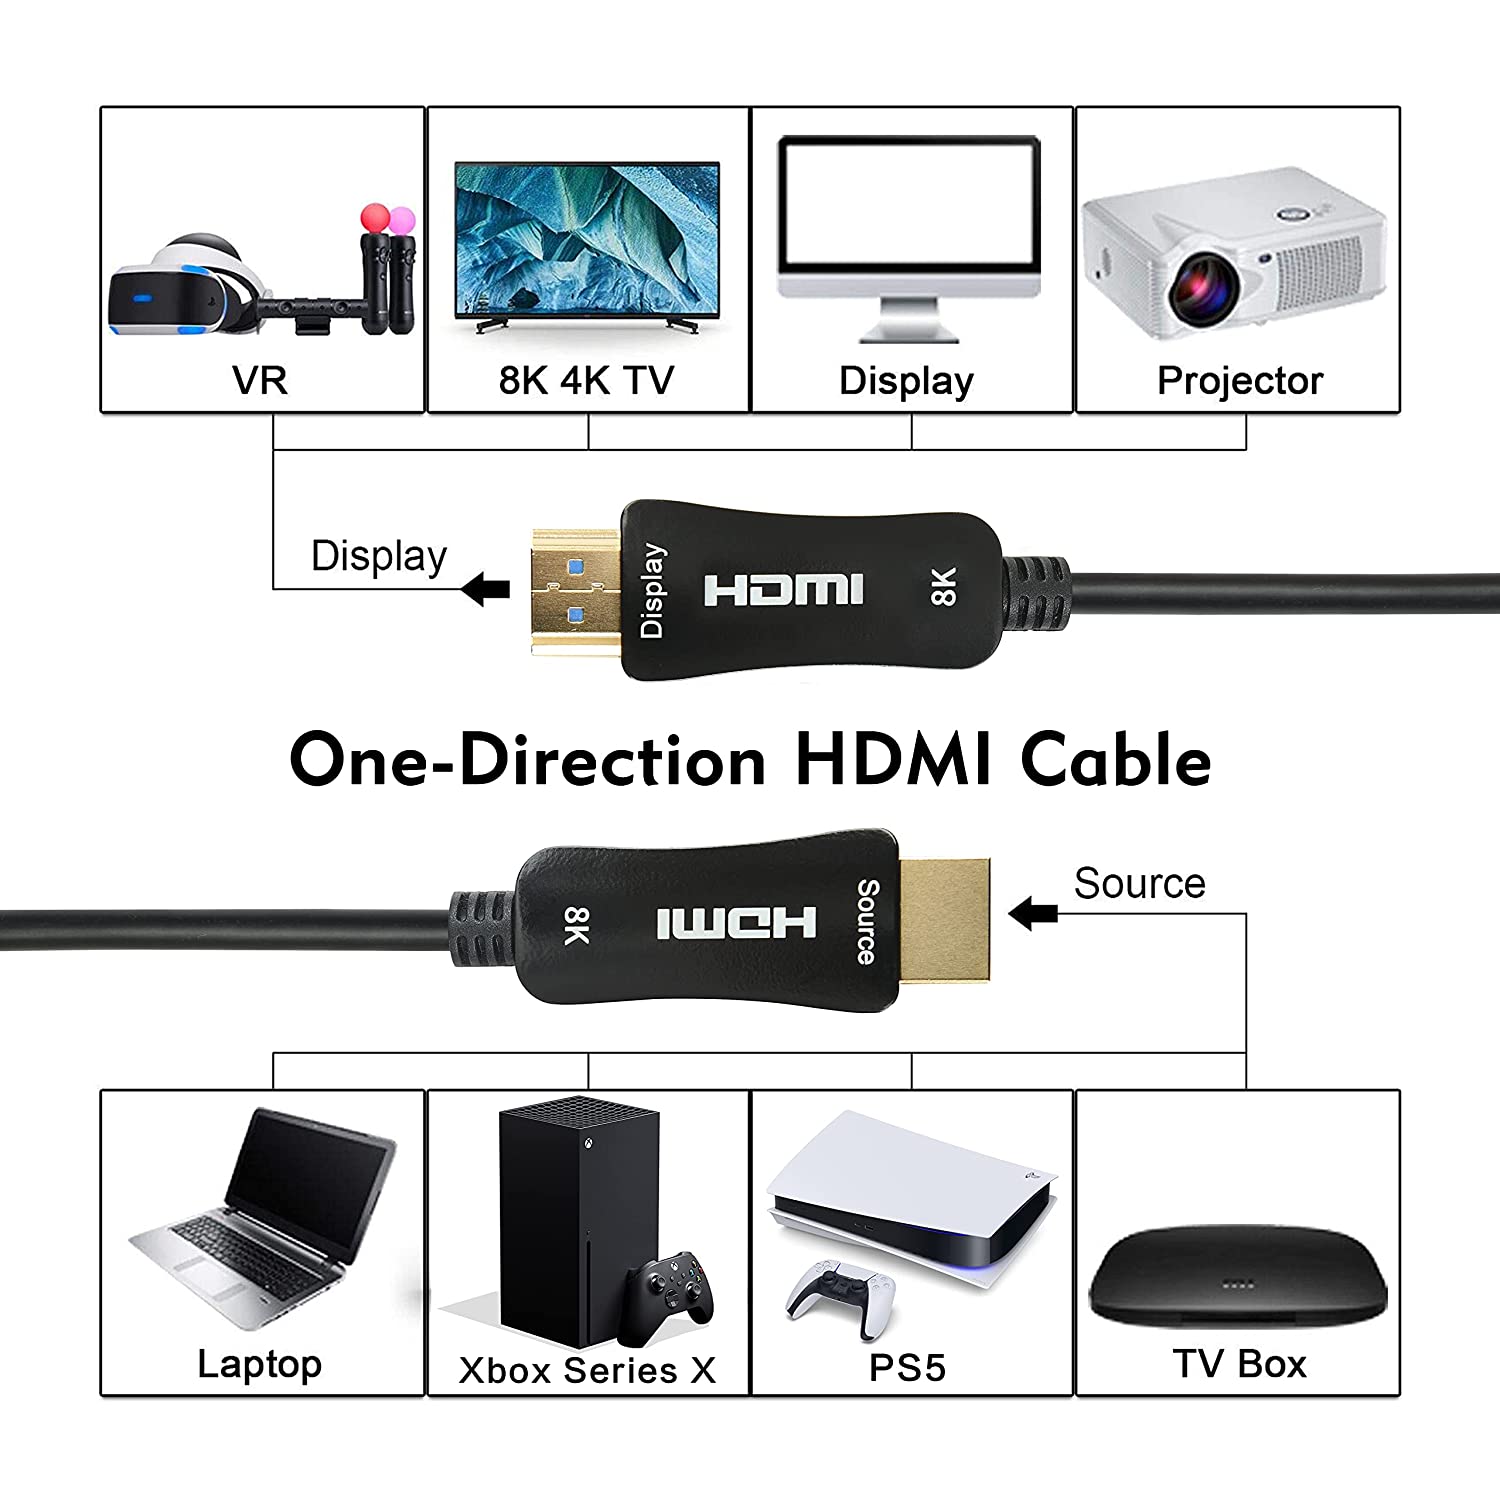 8K Fiber Optic HDMI 2.1 Cable 8K60hz 4K120hz HDCP 2.3 2.2 eARC ARC 48Gbps Ultra High Speed Compatible with Apple-TV Dolby Vision Atmos PS5 PS4, Xbox One Series X, RTX 3080 3090